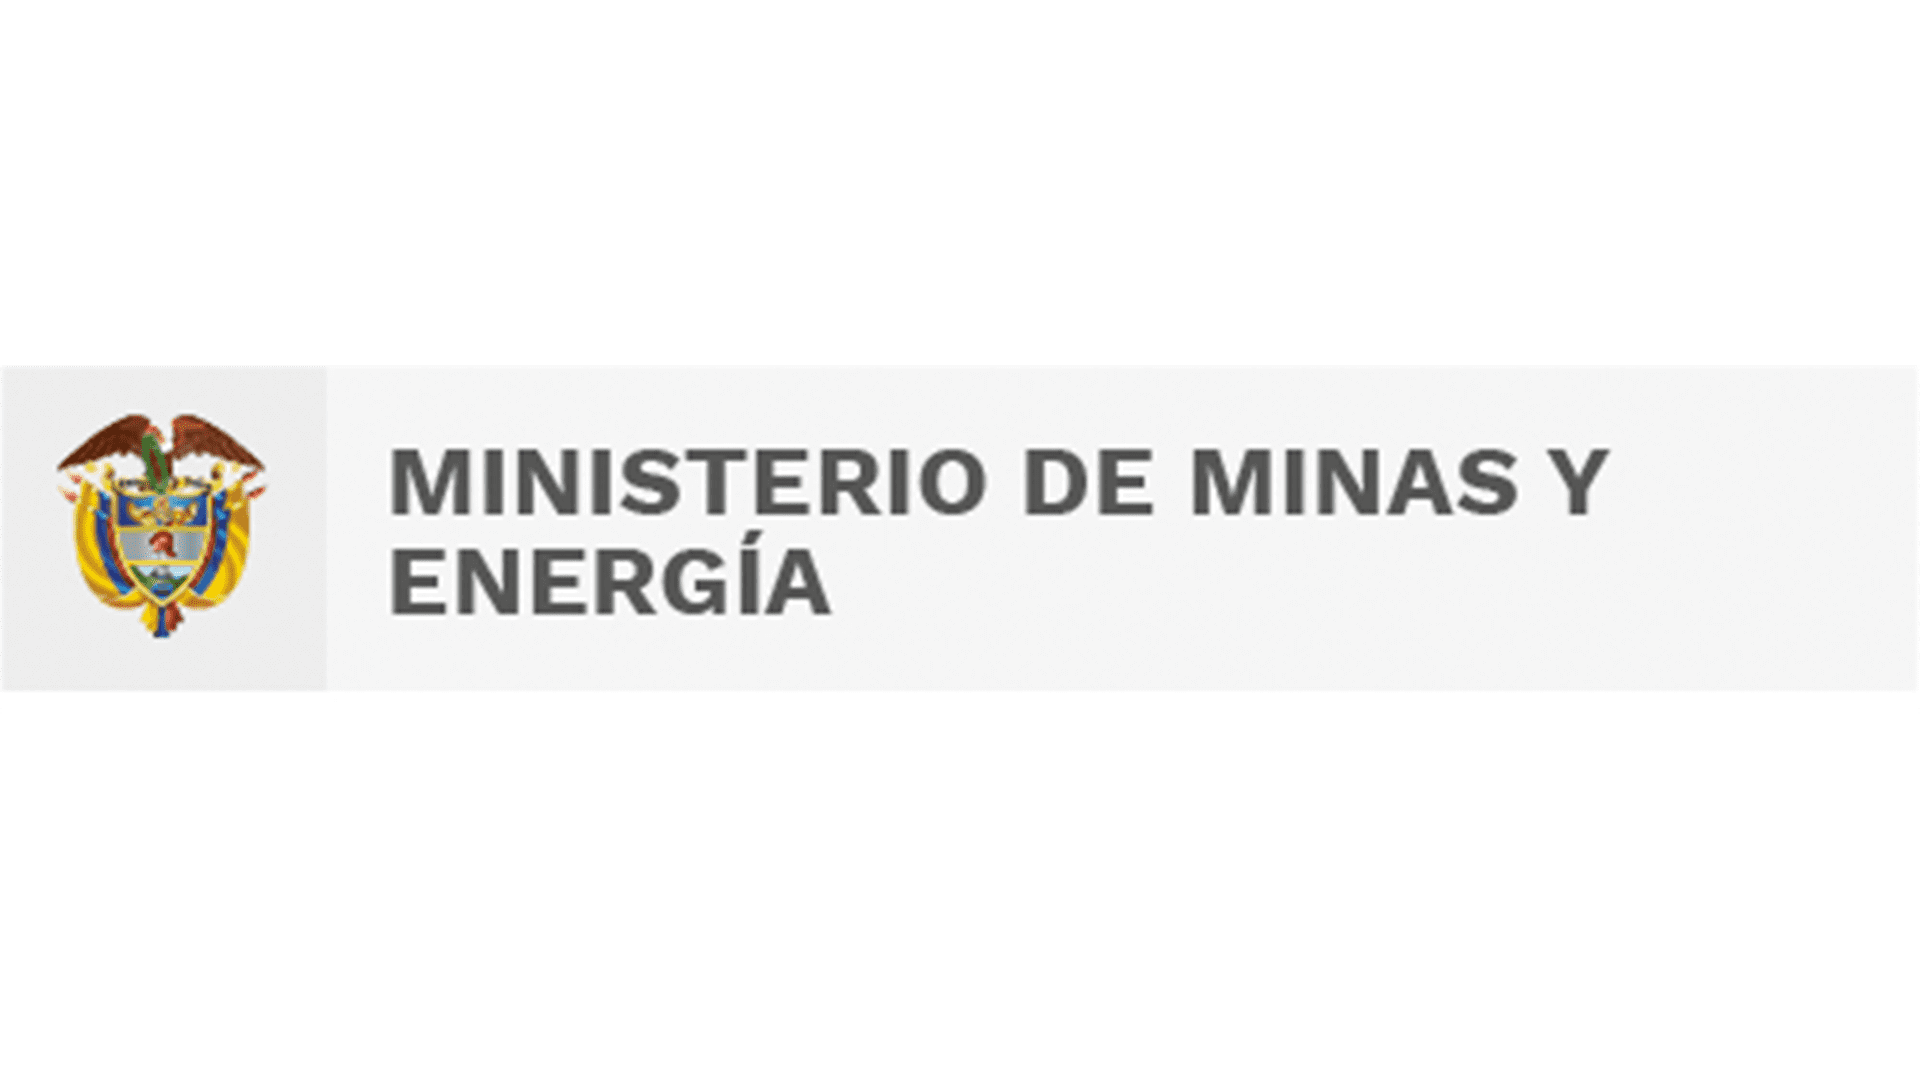 Ministry of Mines and Energy's logo